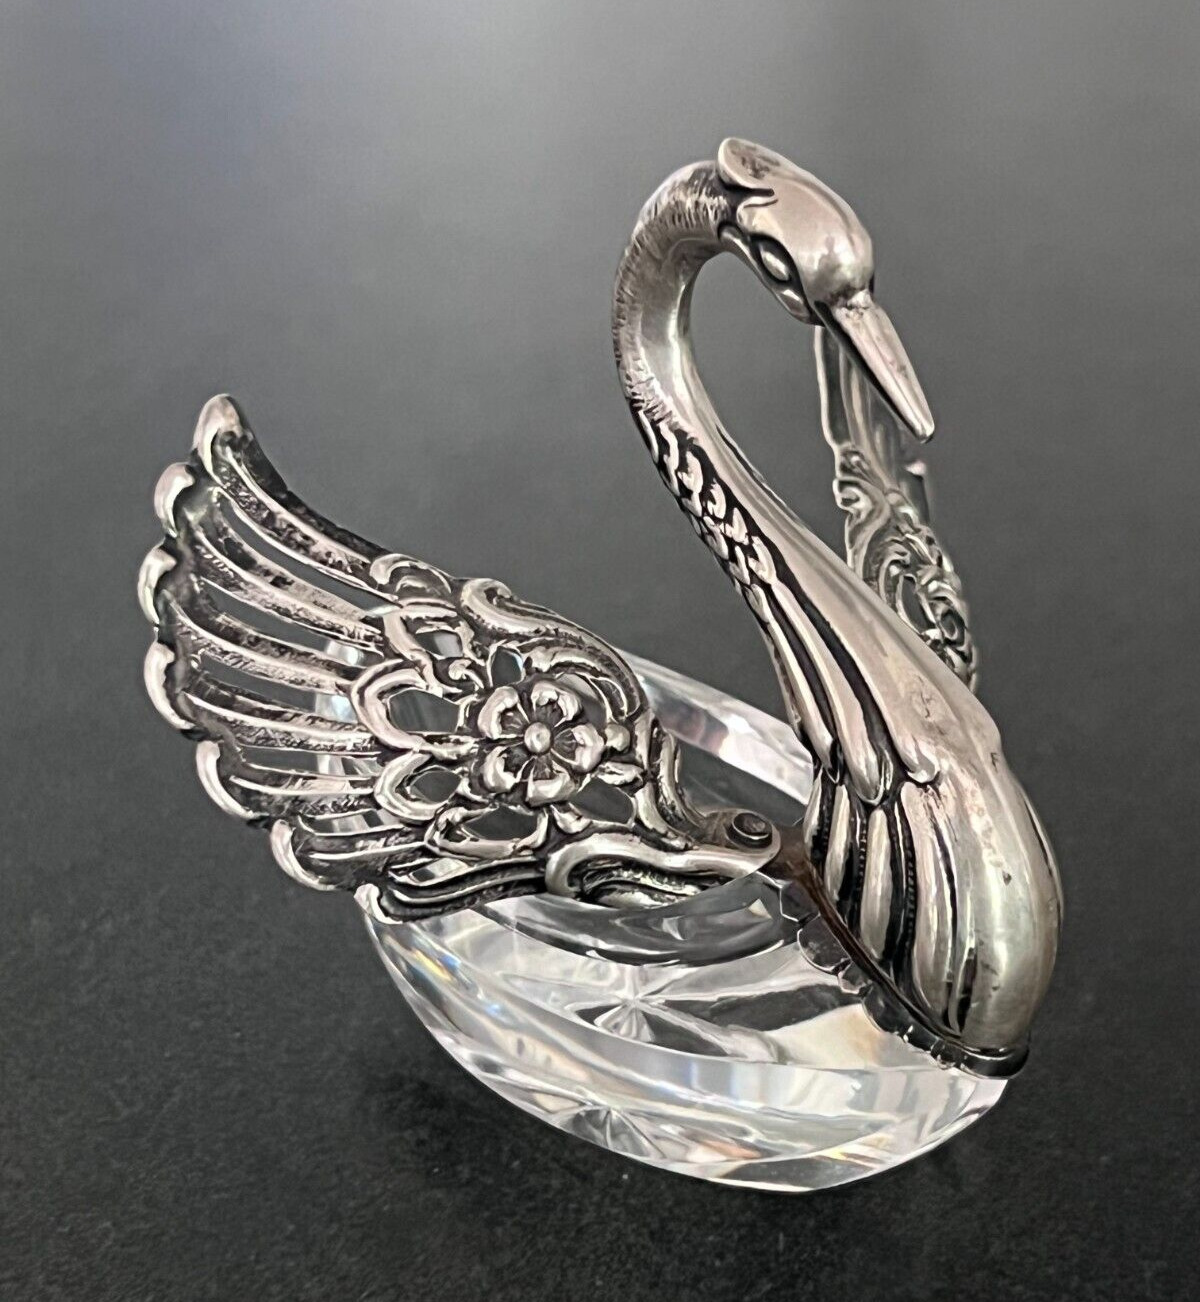 Vintage Silver 835 Crystal Swan Salt Cellar with Articulated Wings